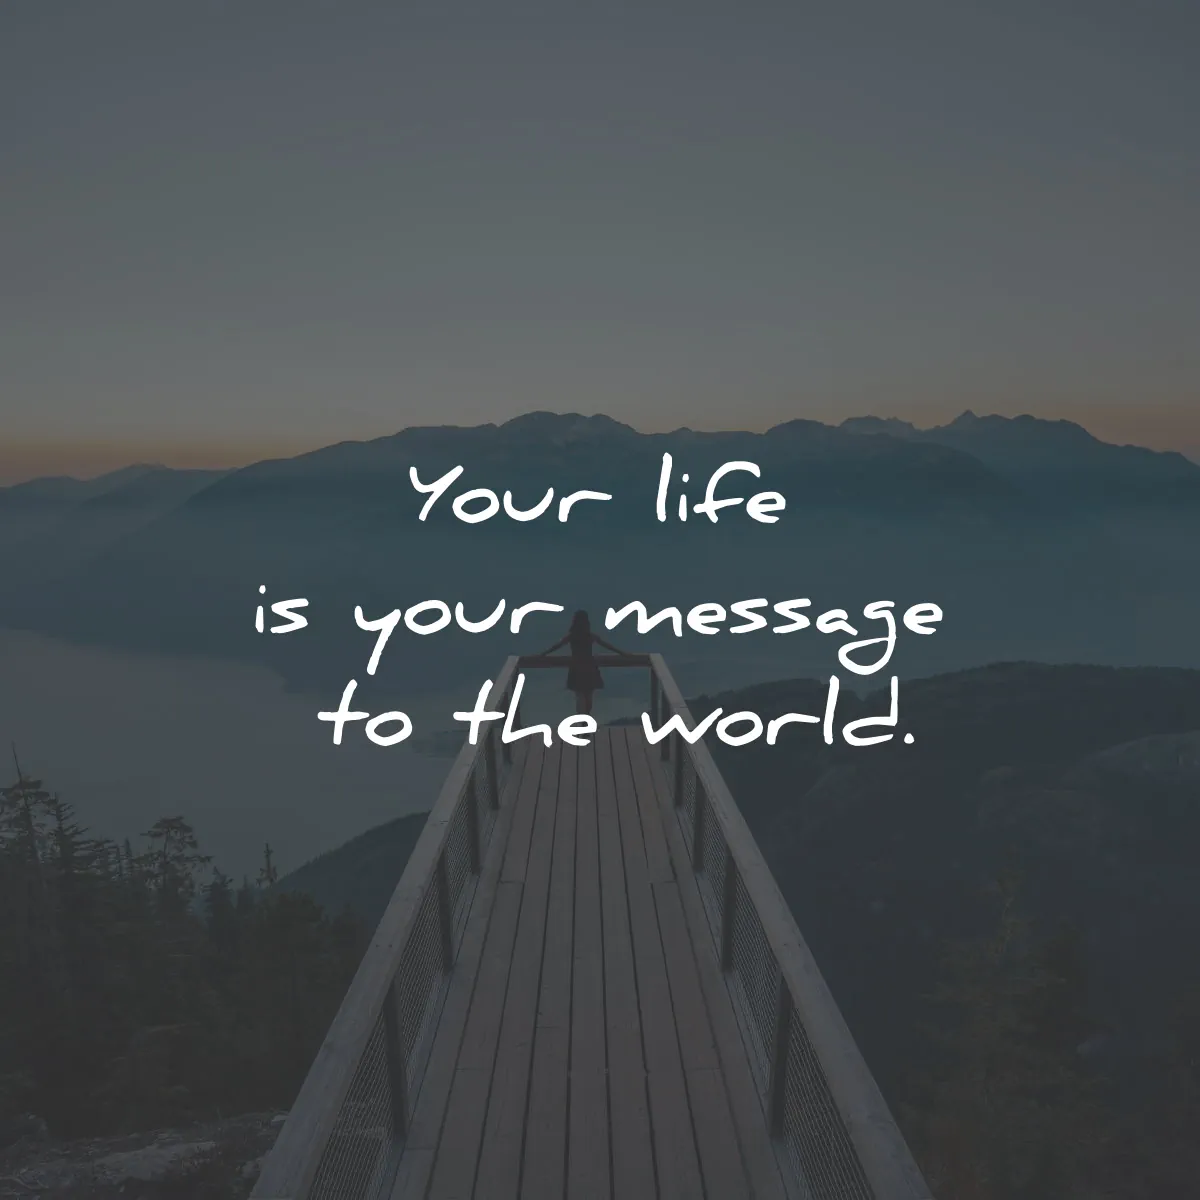 meaning of life quotes your message world wisdom